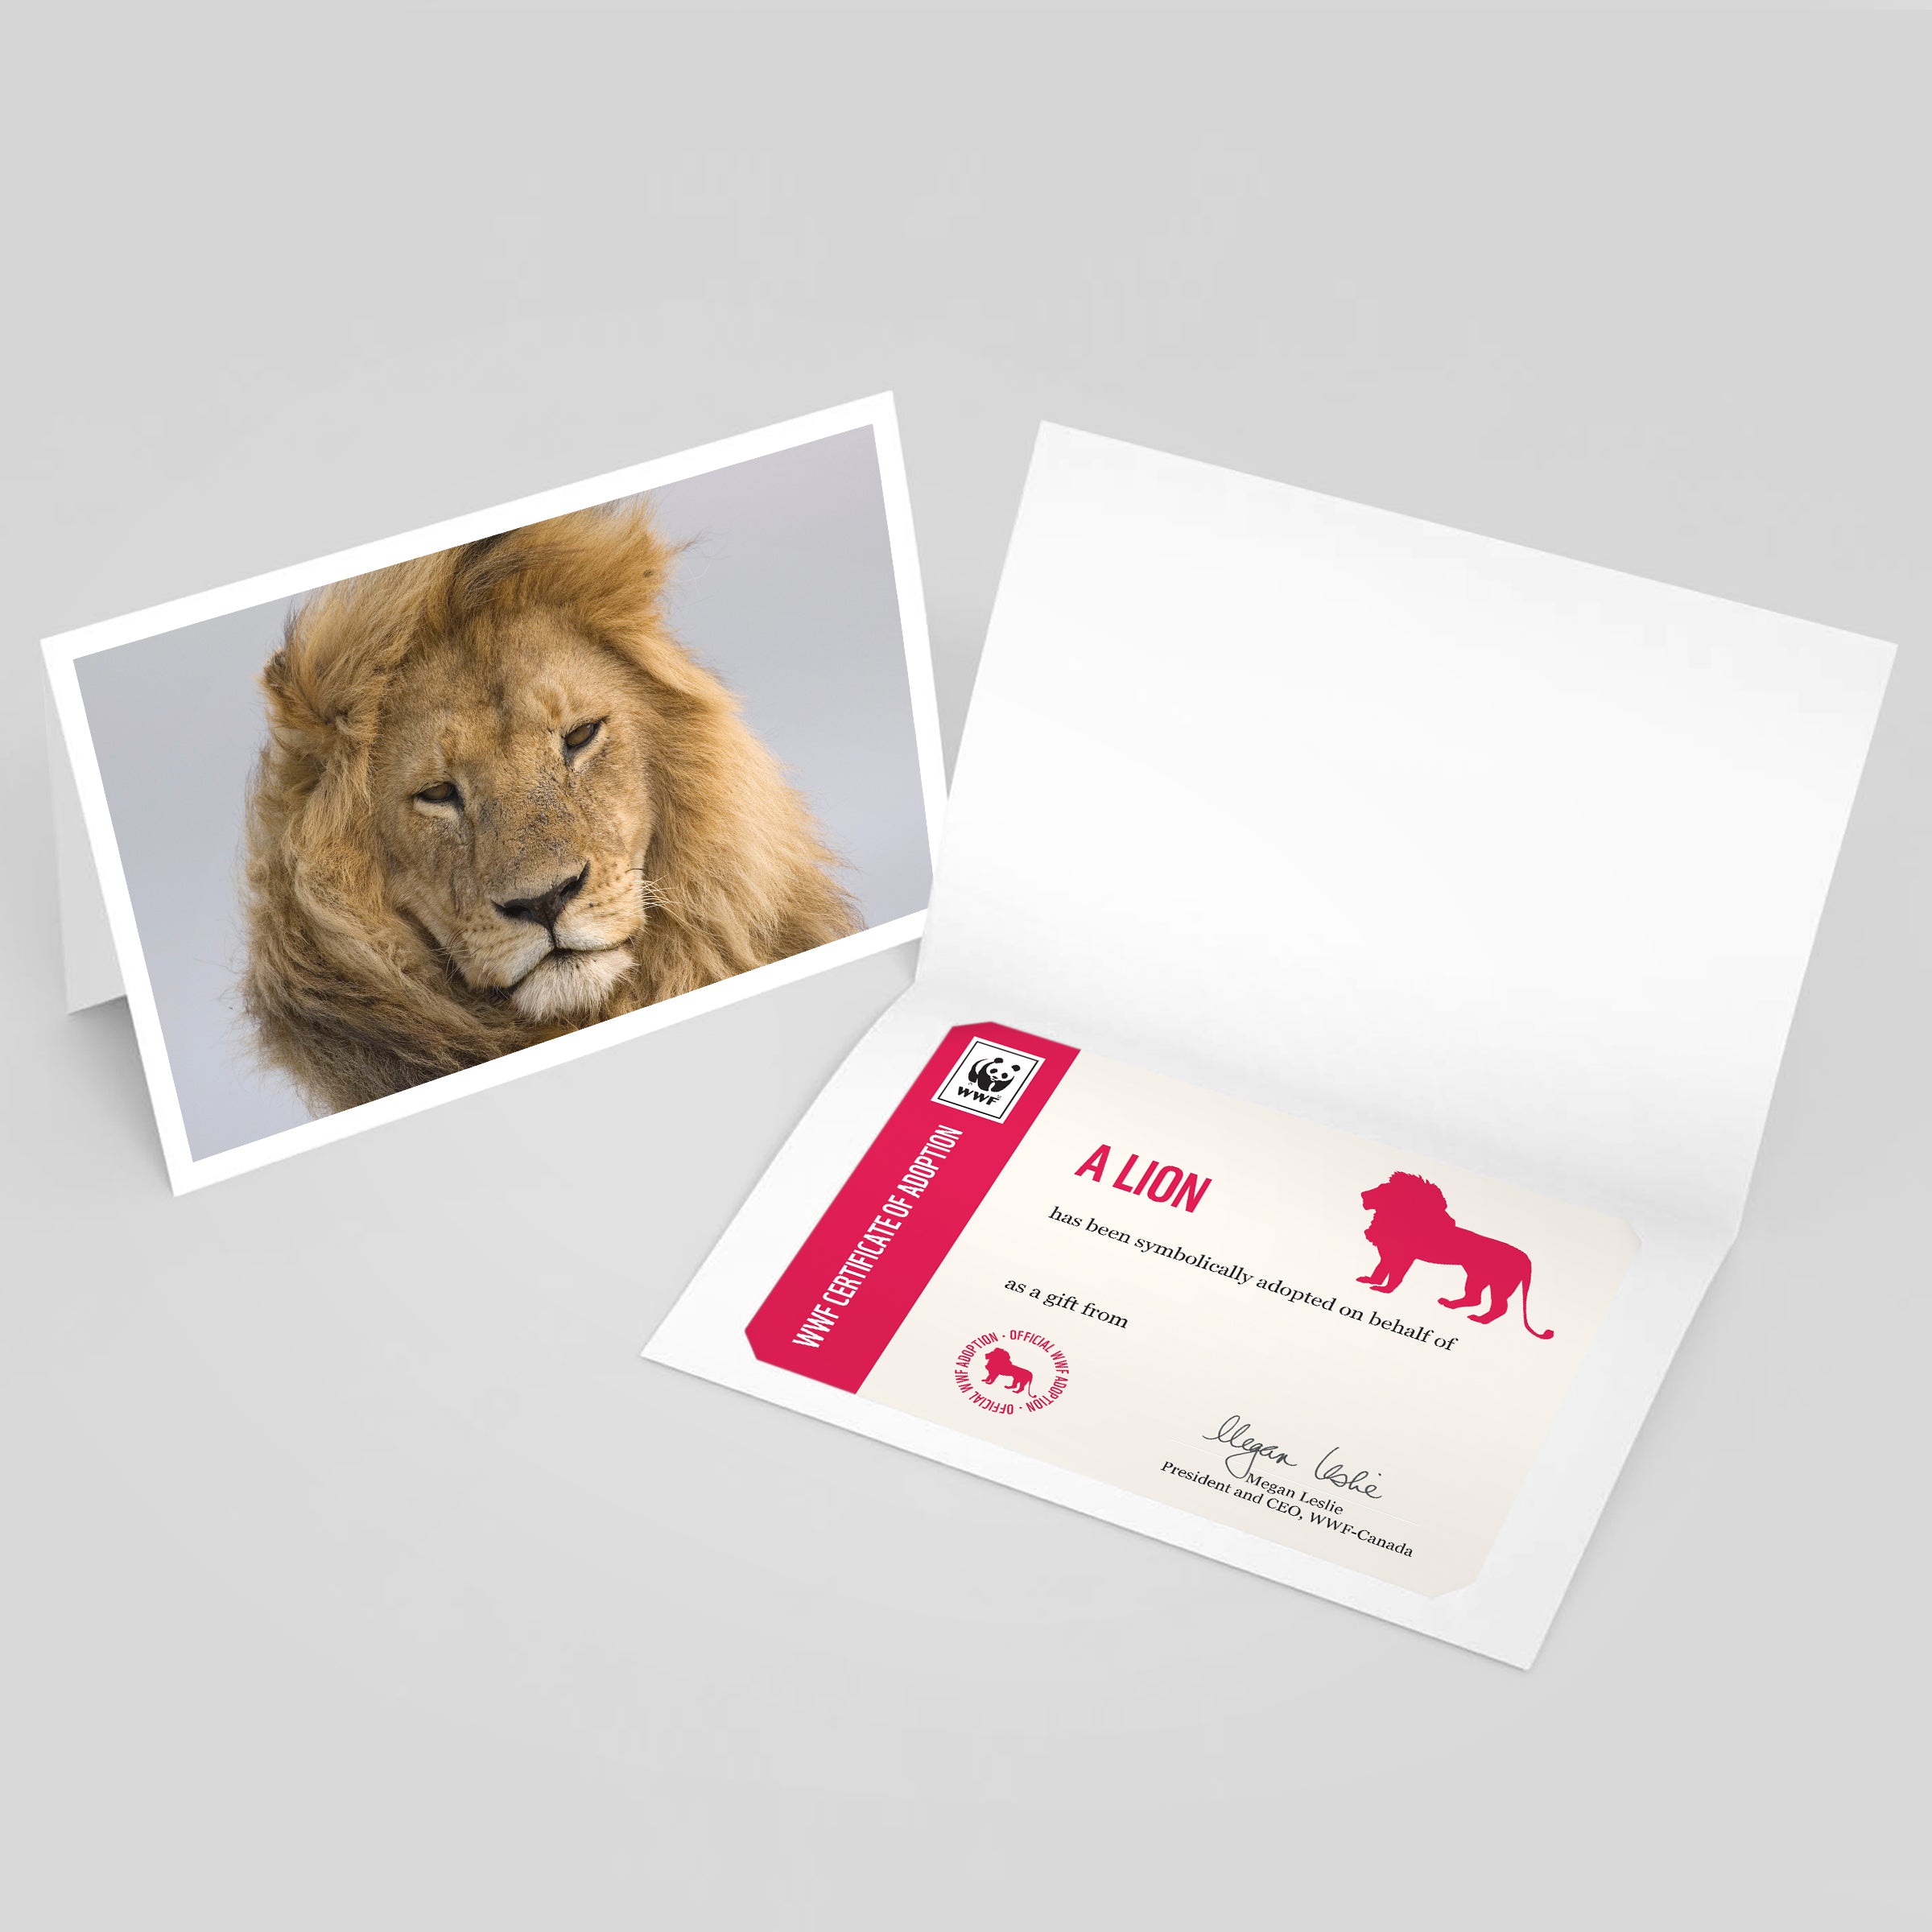 An image of a folded card with a photo of a lion on the front. Beside it is an image of a lion adoption certificate